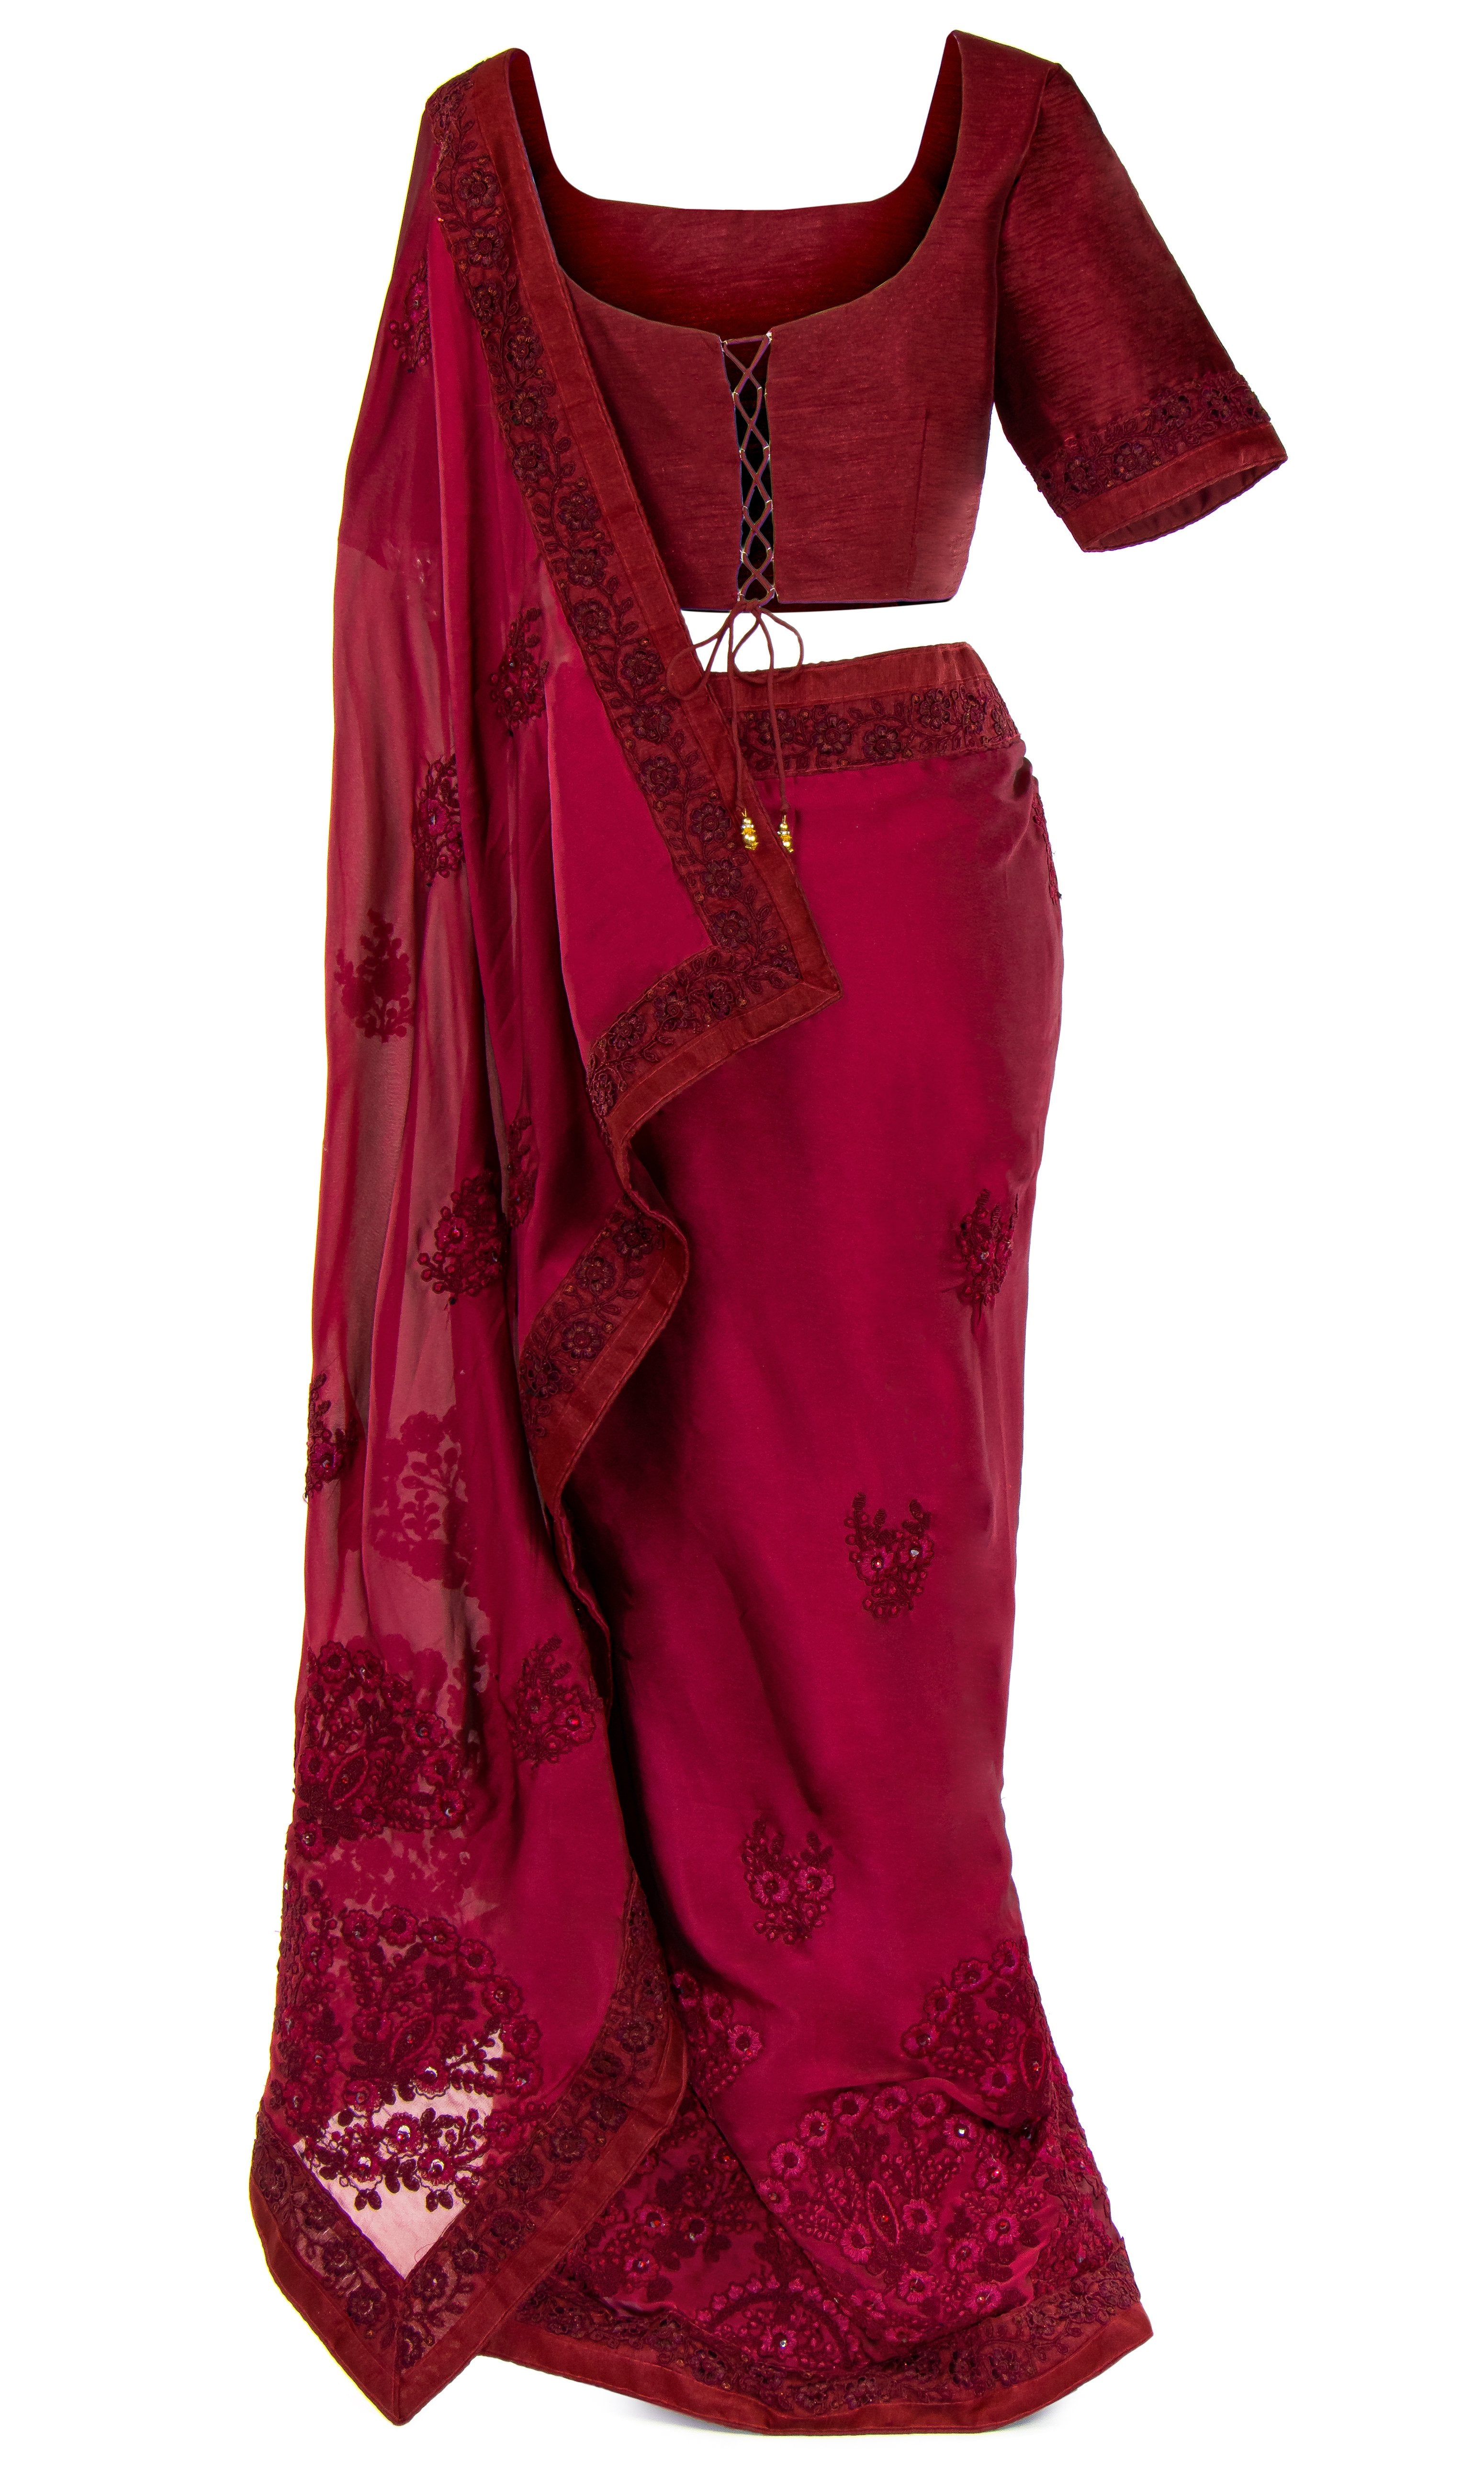 Maroon silk Saree with Blouse is adjustable. A classic top features beautiful floral.Drop dead gorgeous.